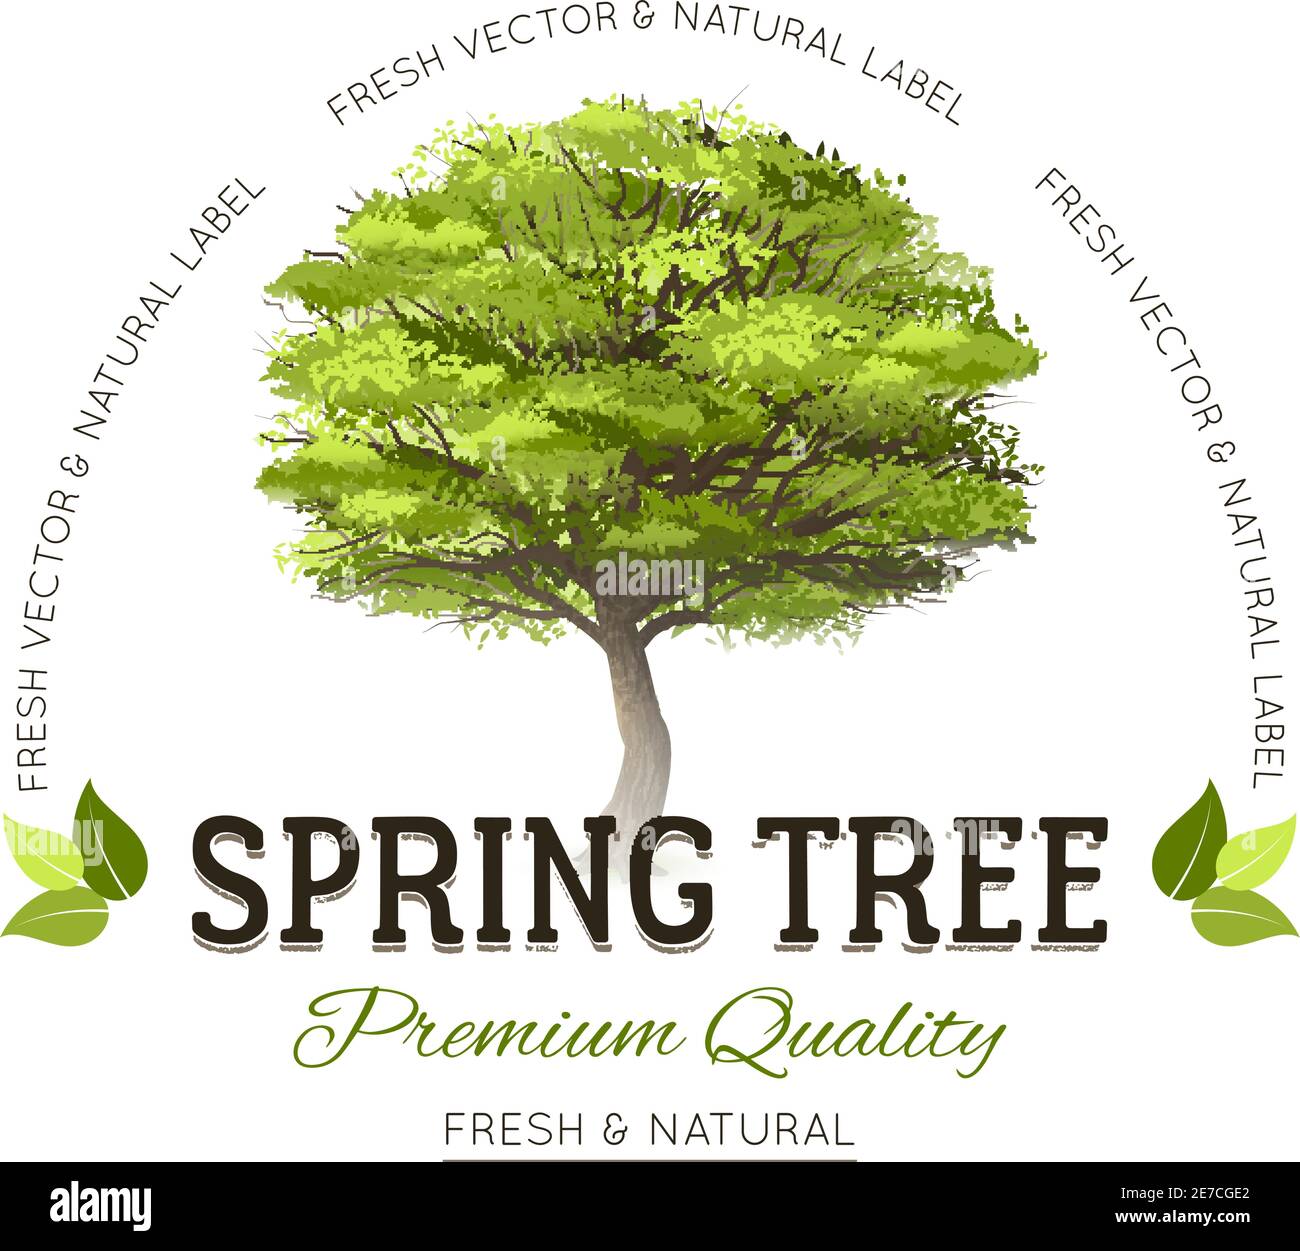 Typography logo emblem with realistic green spring tree and premium quality text vector illustration Stock Vector